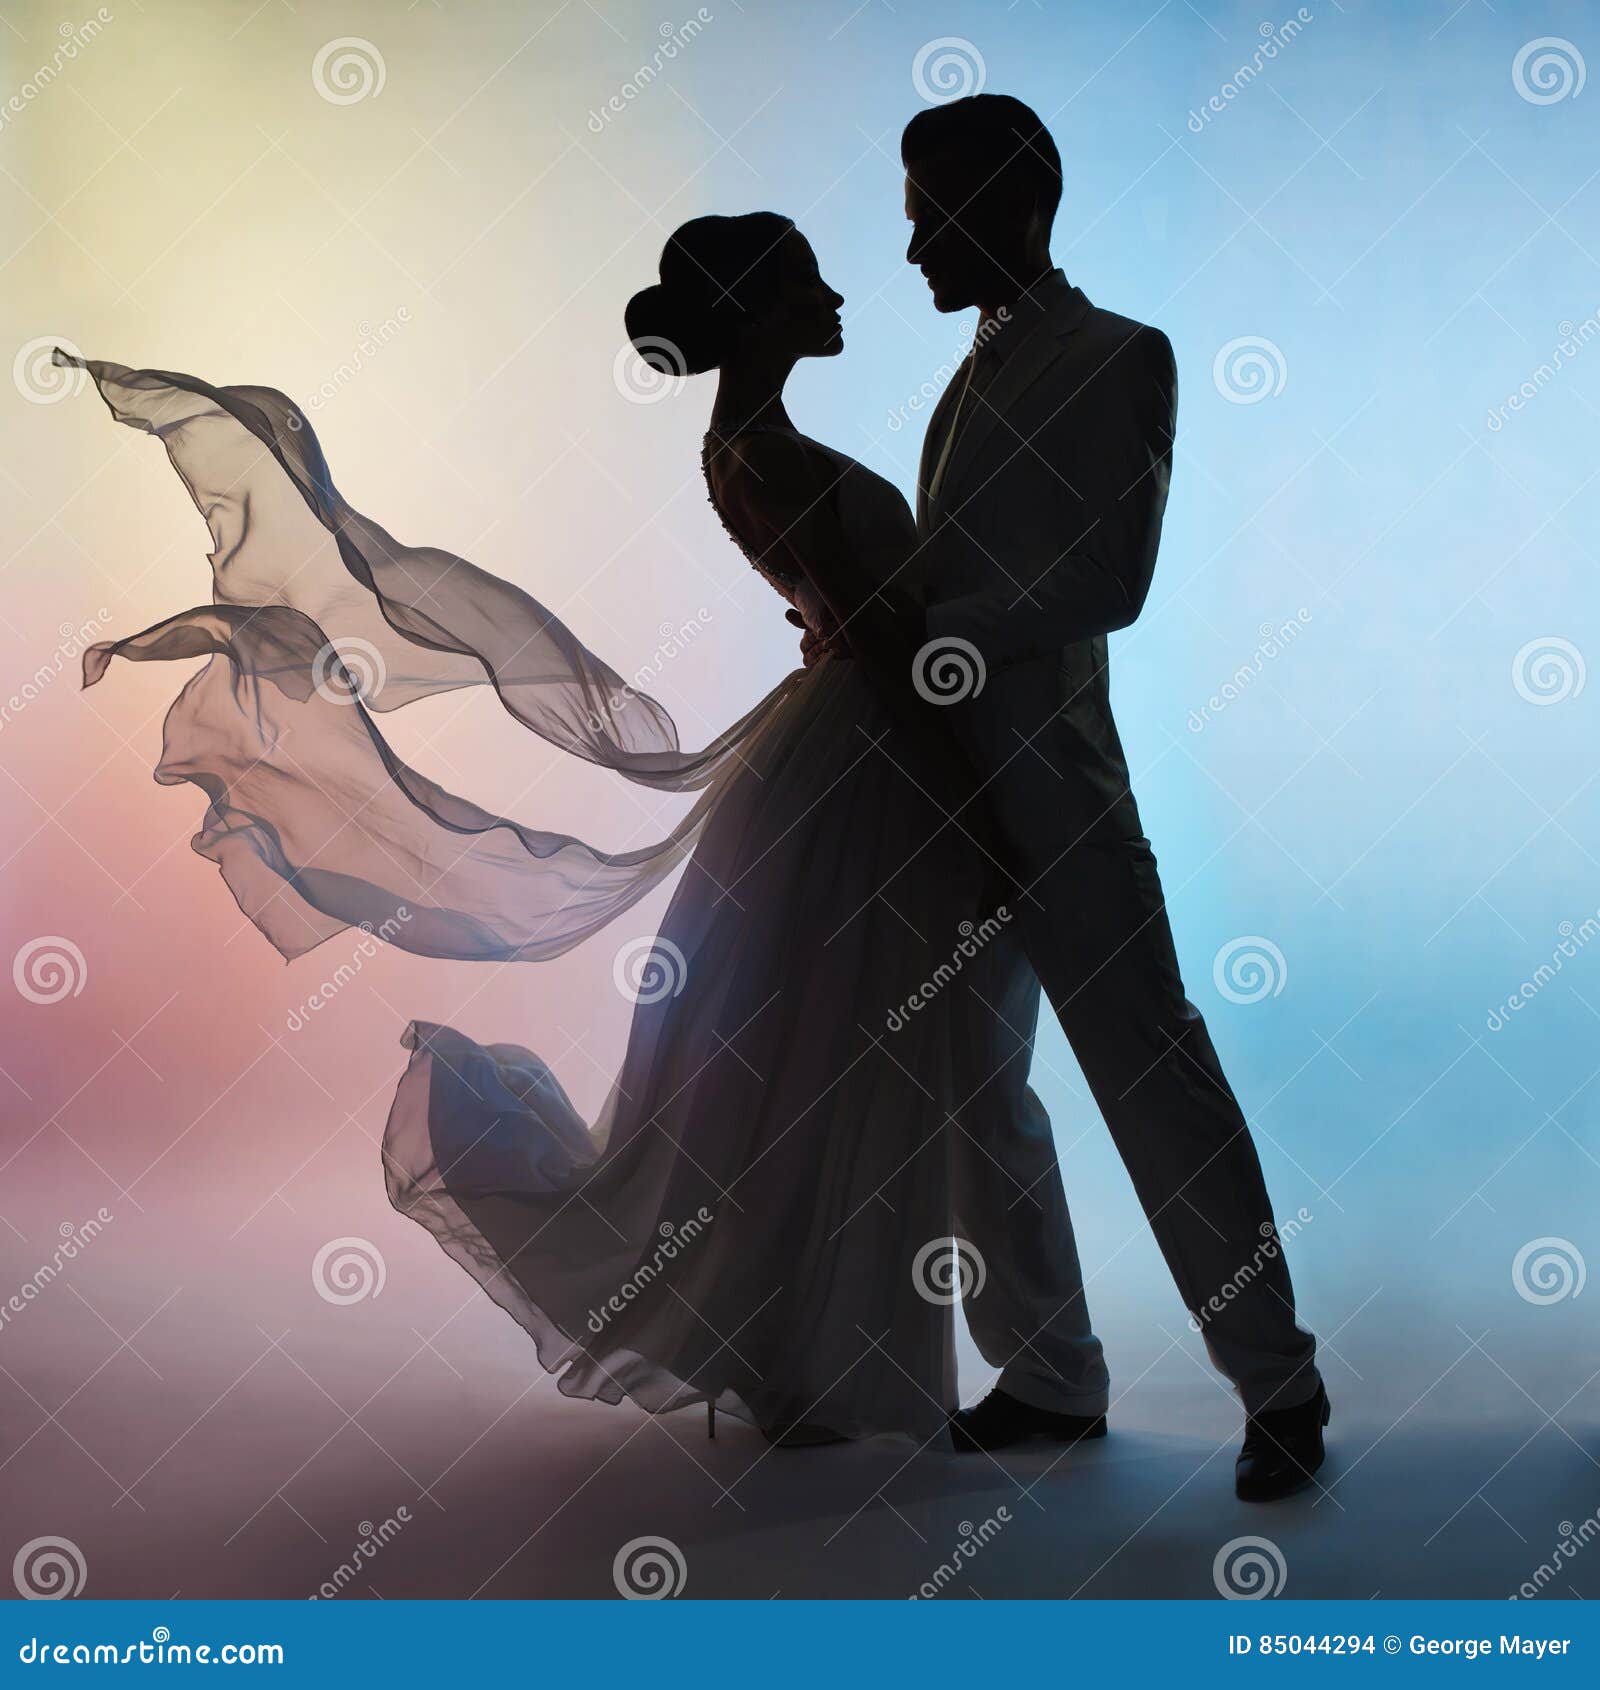 wedding couple silhouette groom and bride on colors background